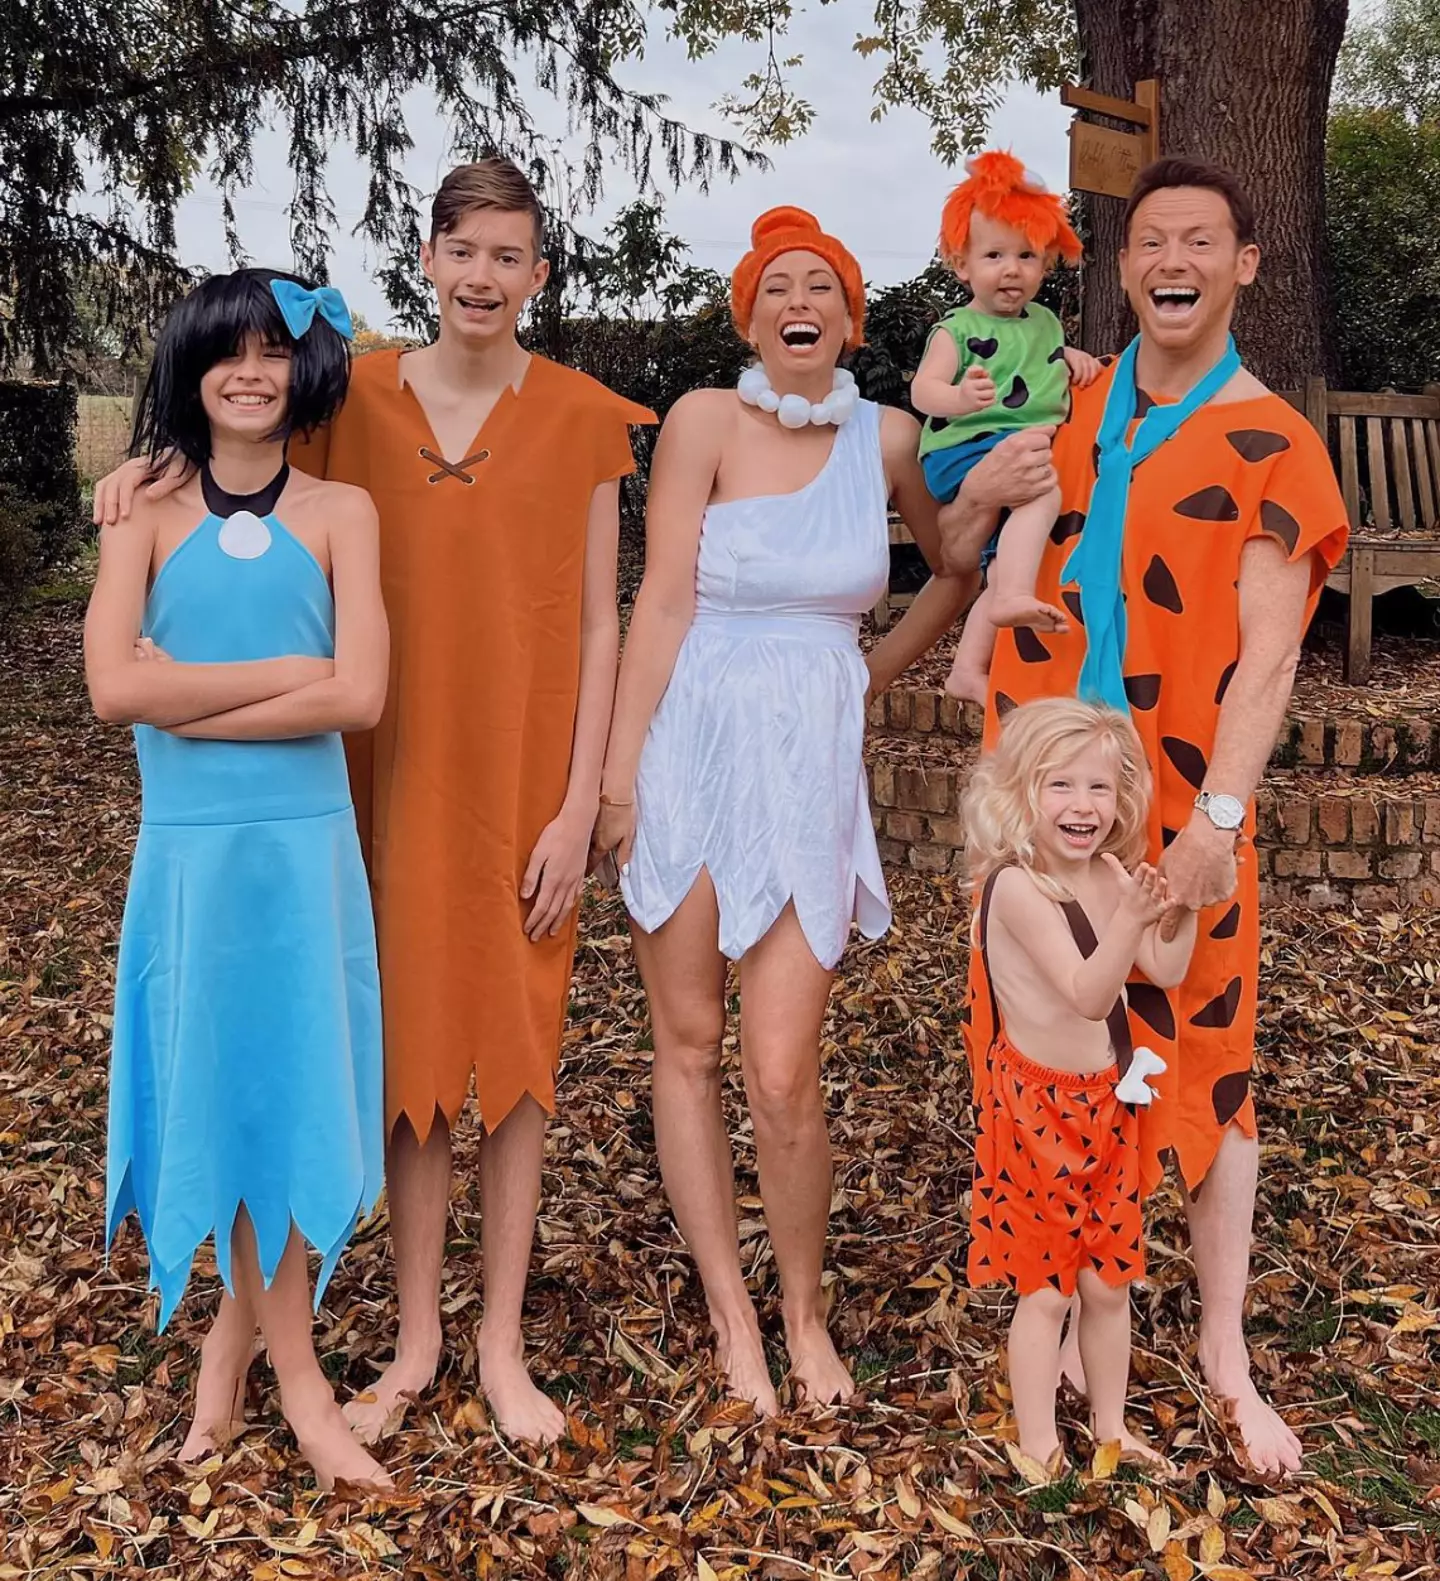 The family dressed as the Flintstones for Halloween.